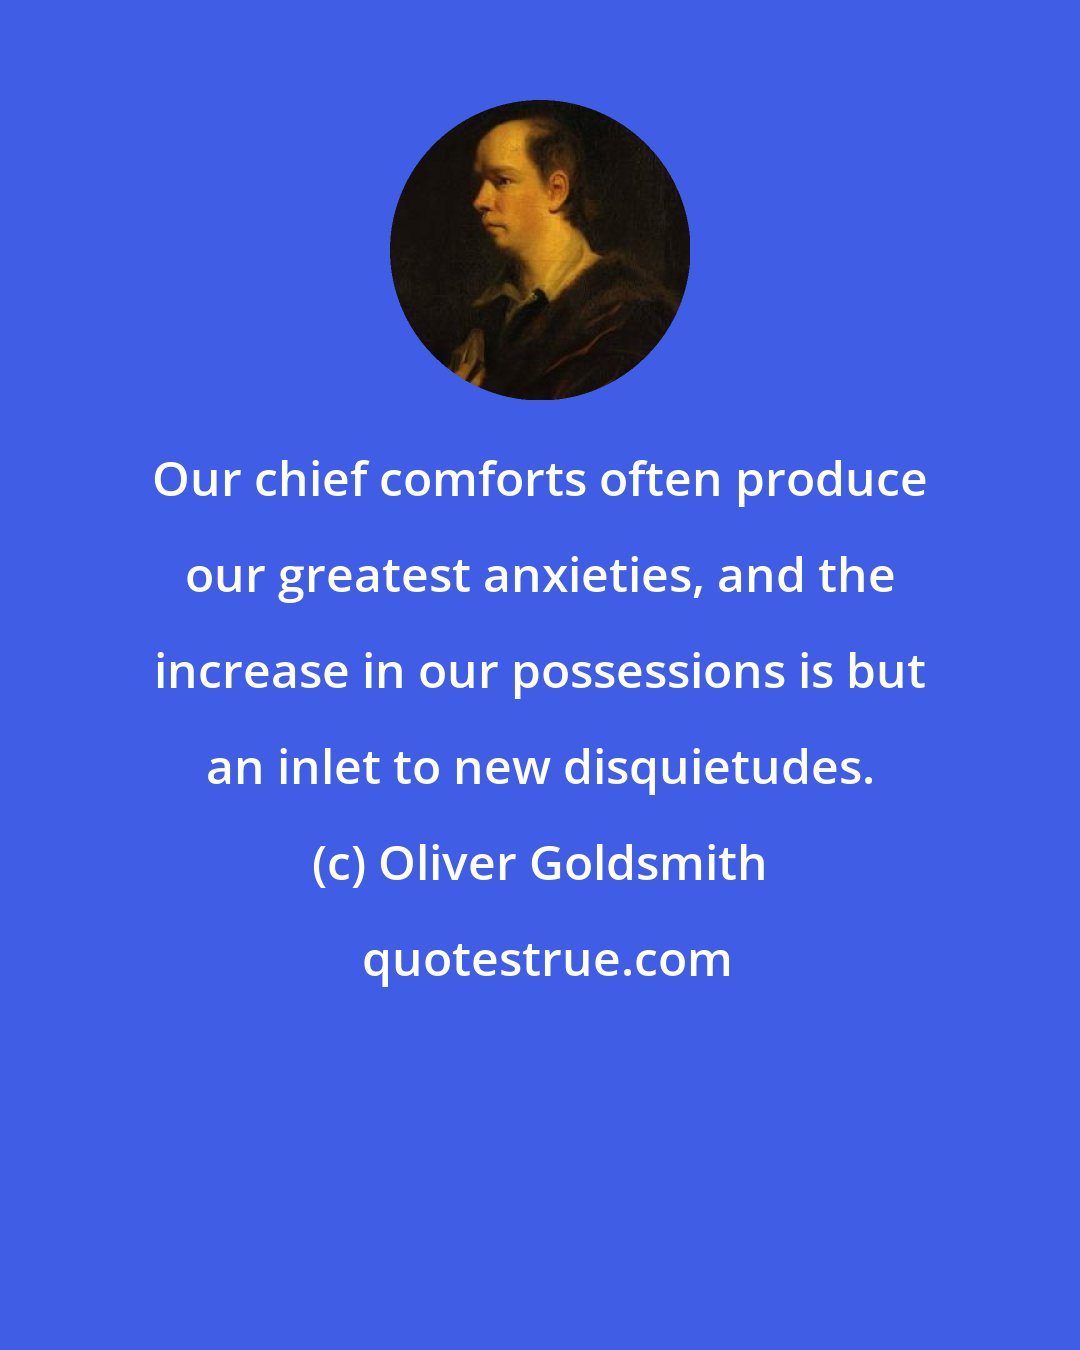 Oliver Goldsmith: Our chief comforts often produce our greatest anxieties, and the increase in our possessions is but an inlet to new disquietudes.